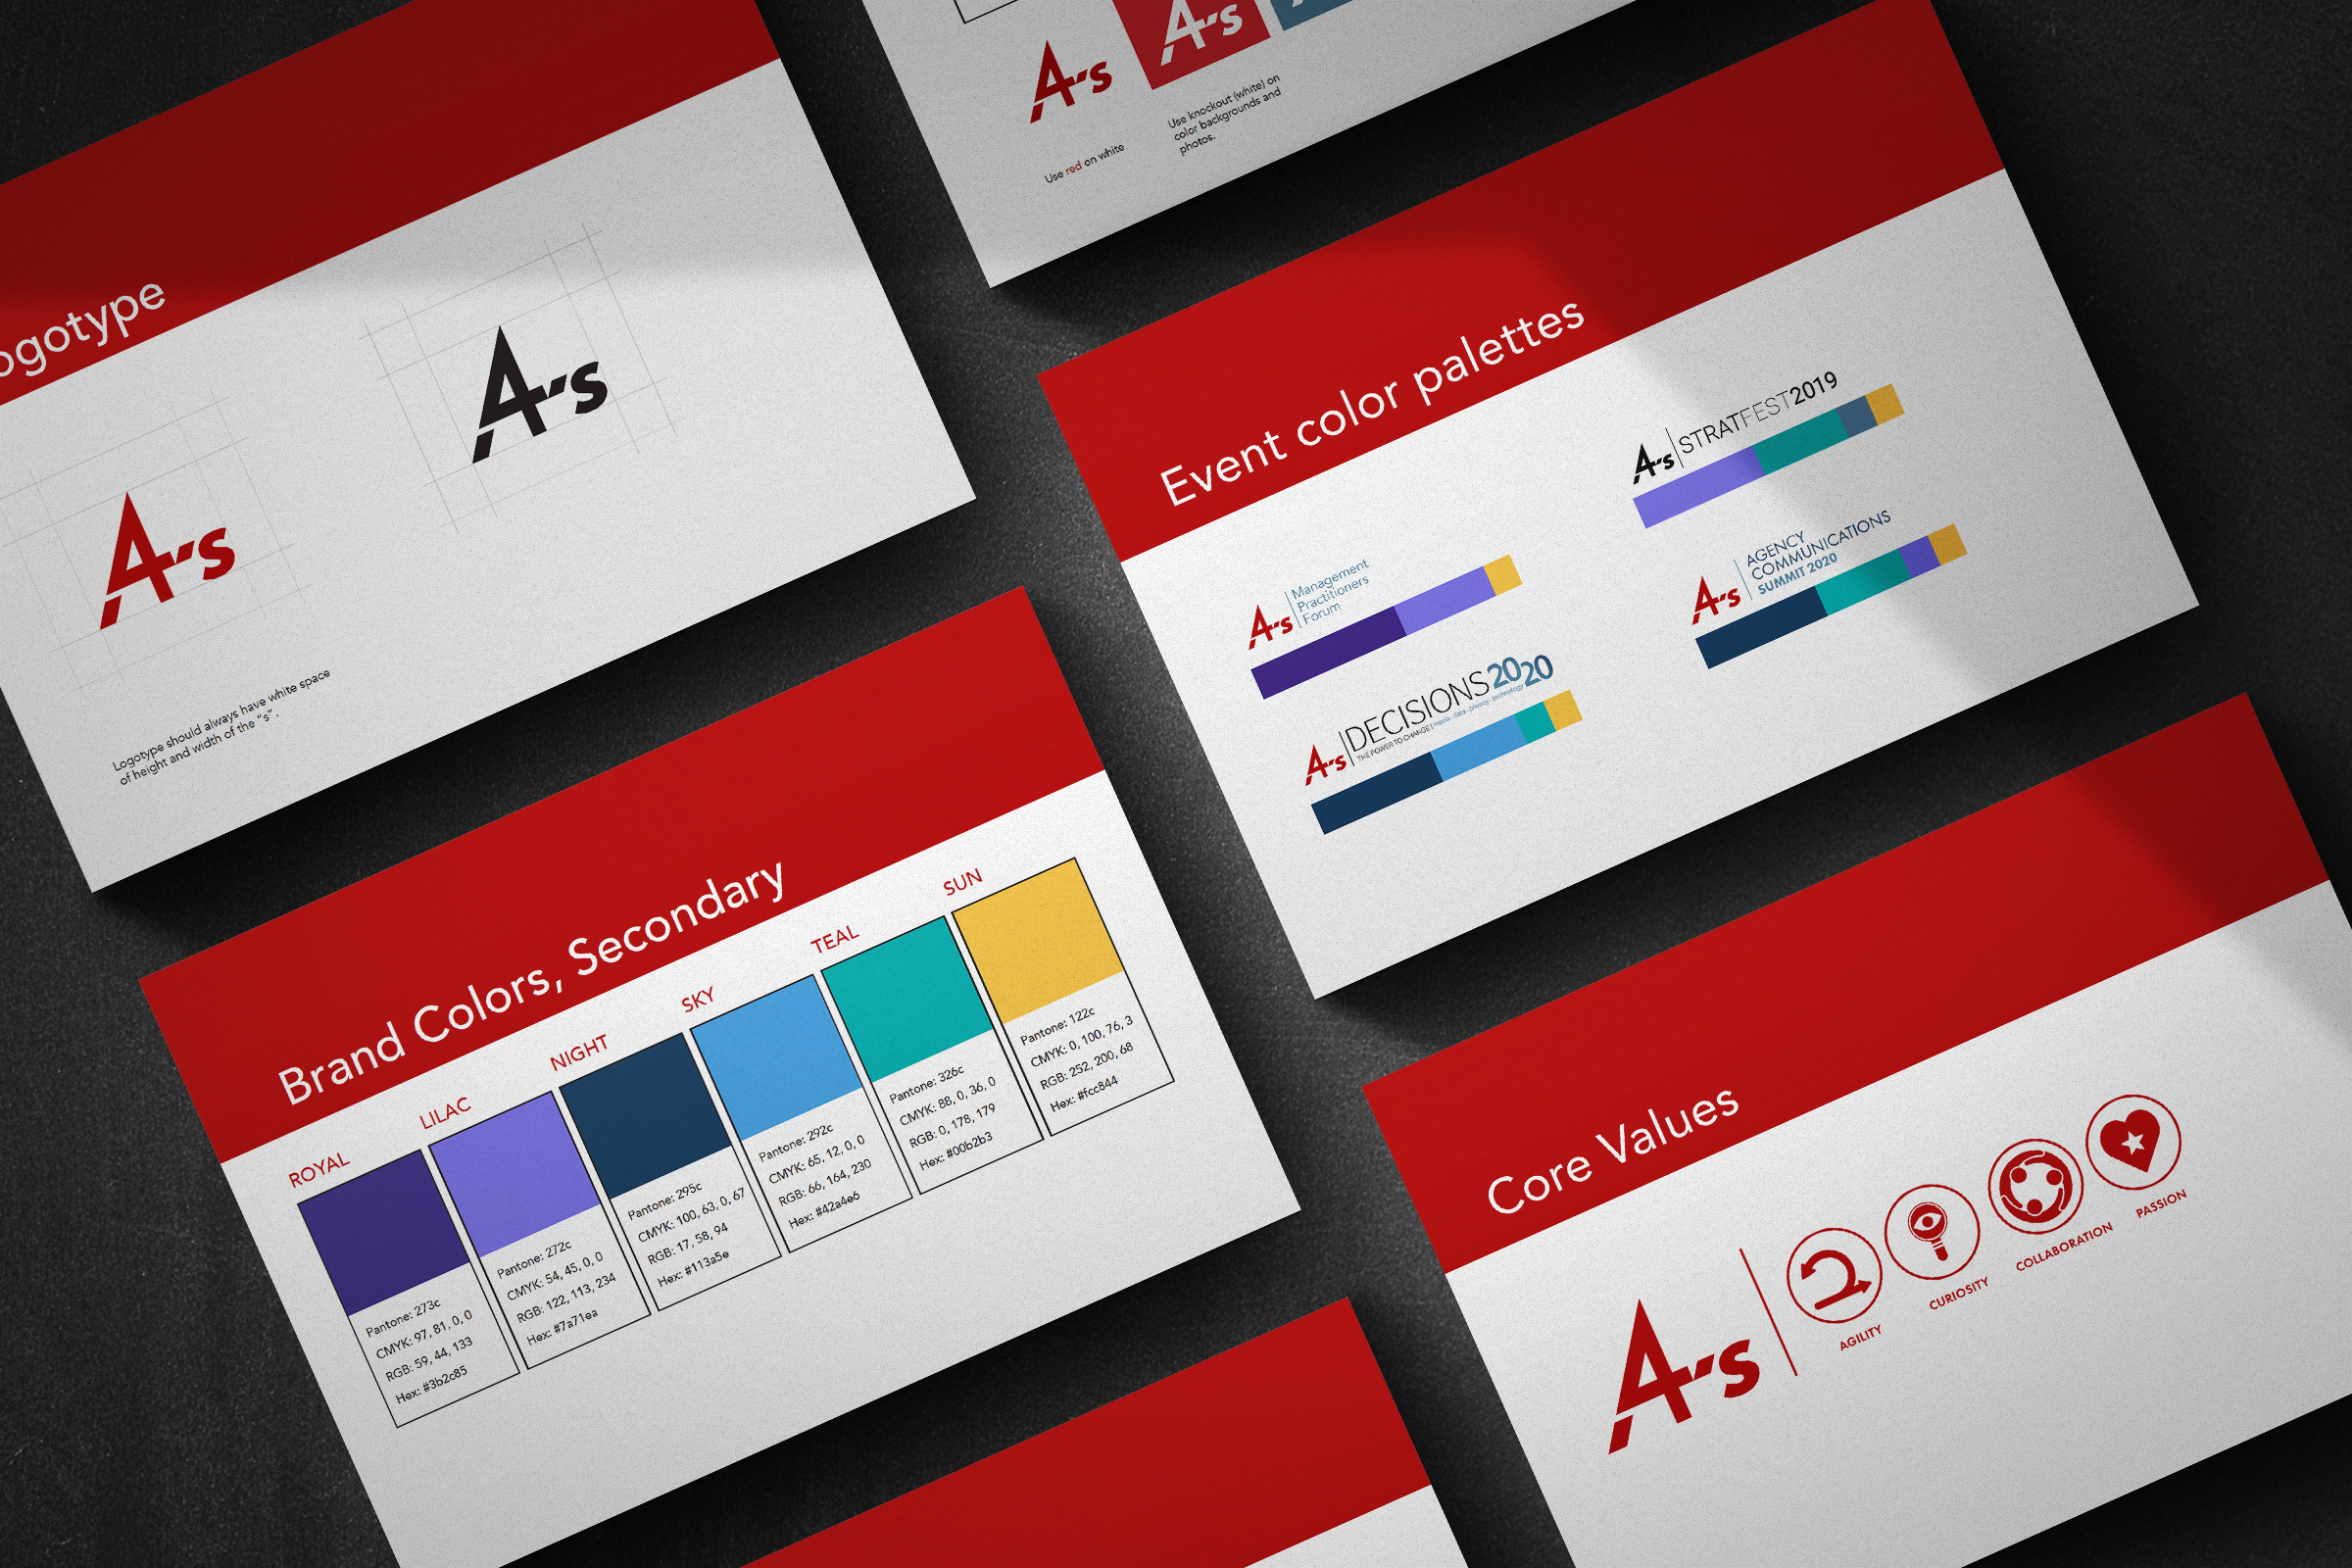 4A's Brand Guidelines